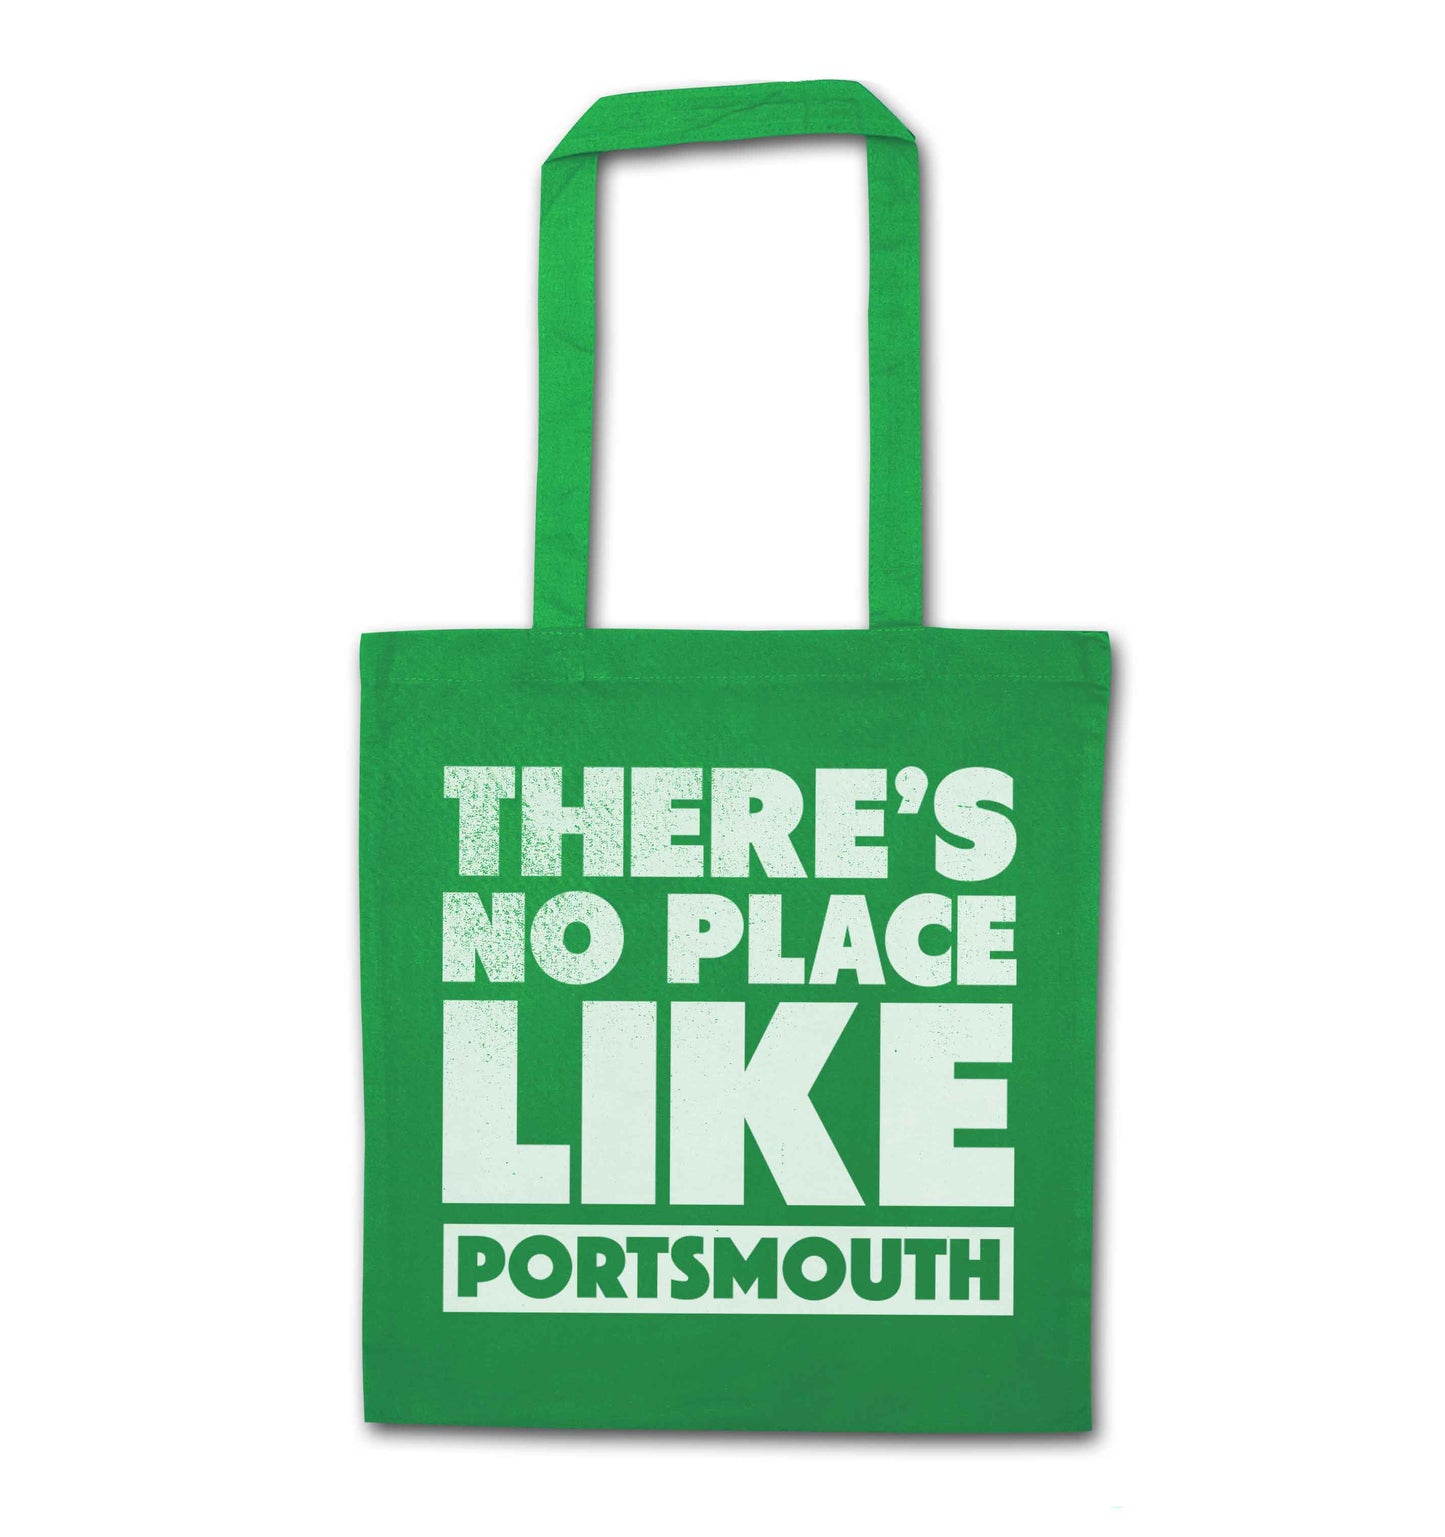 There's no place like Porstmouth green tote bag